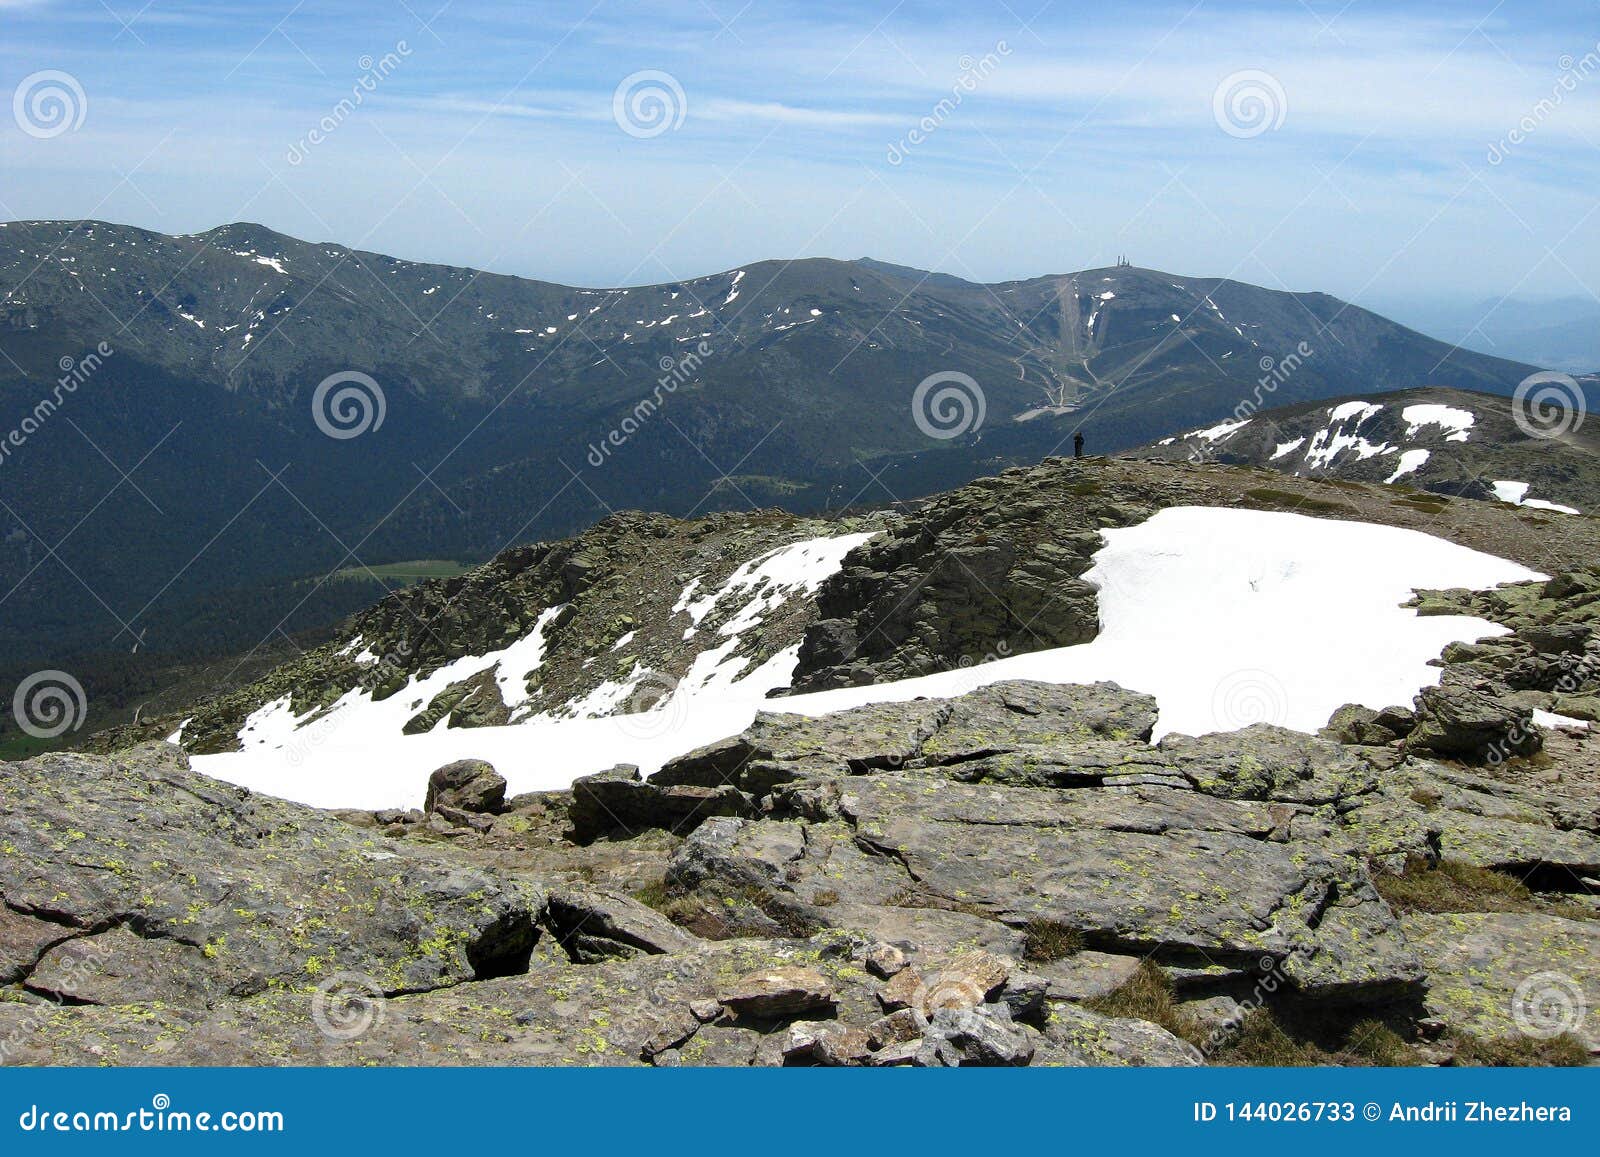 view from the penalara mountain, the highest peak in the mountain range of guadarrama near madrid, spain